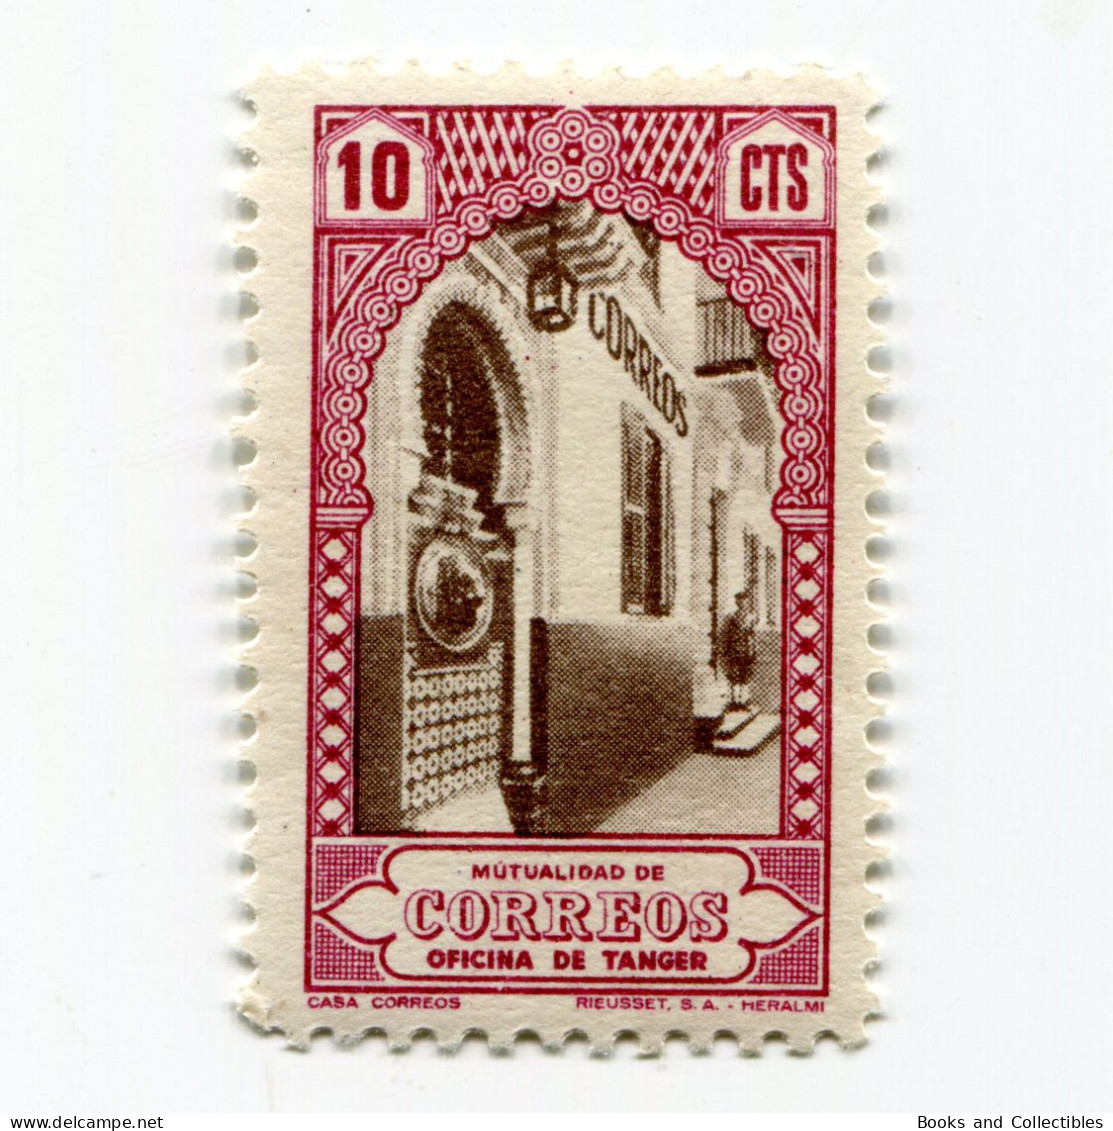 [FBL ● A-01] SPANISH TANGIER - 1946 - Beneficent Stamps - 10 Cts - Edifil ES-TNG BE23 - Charity